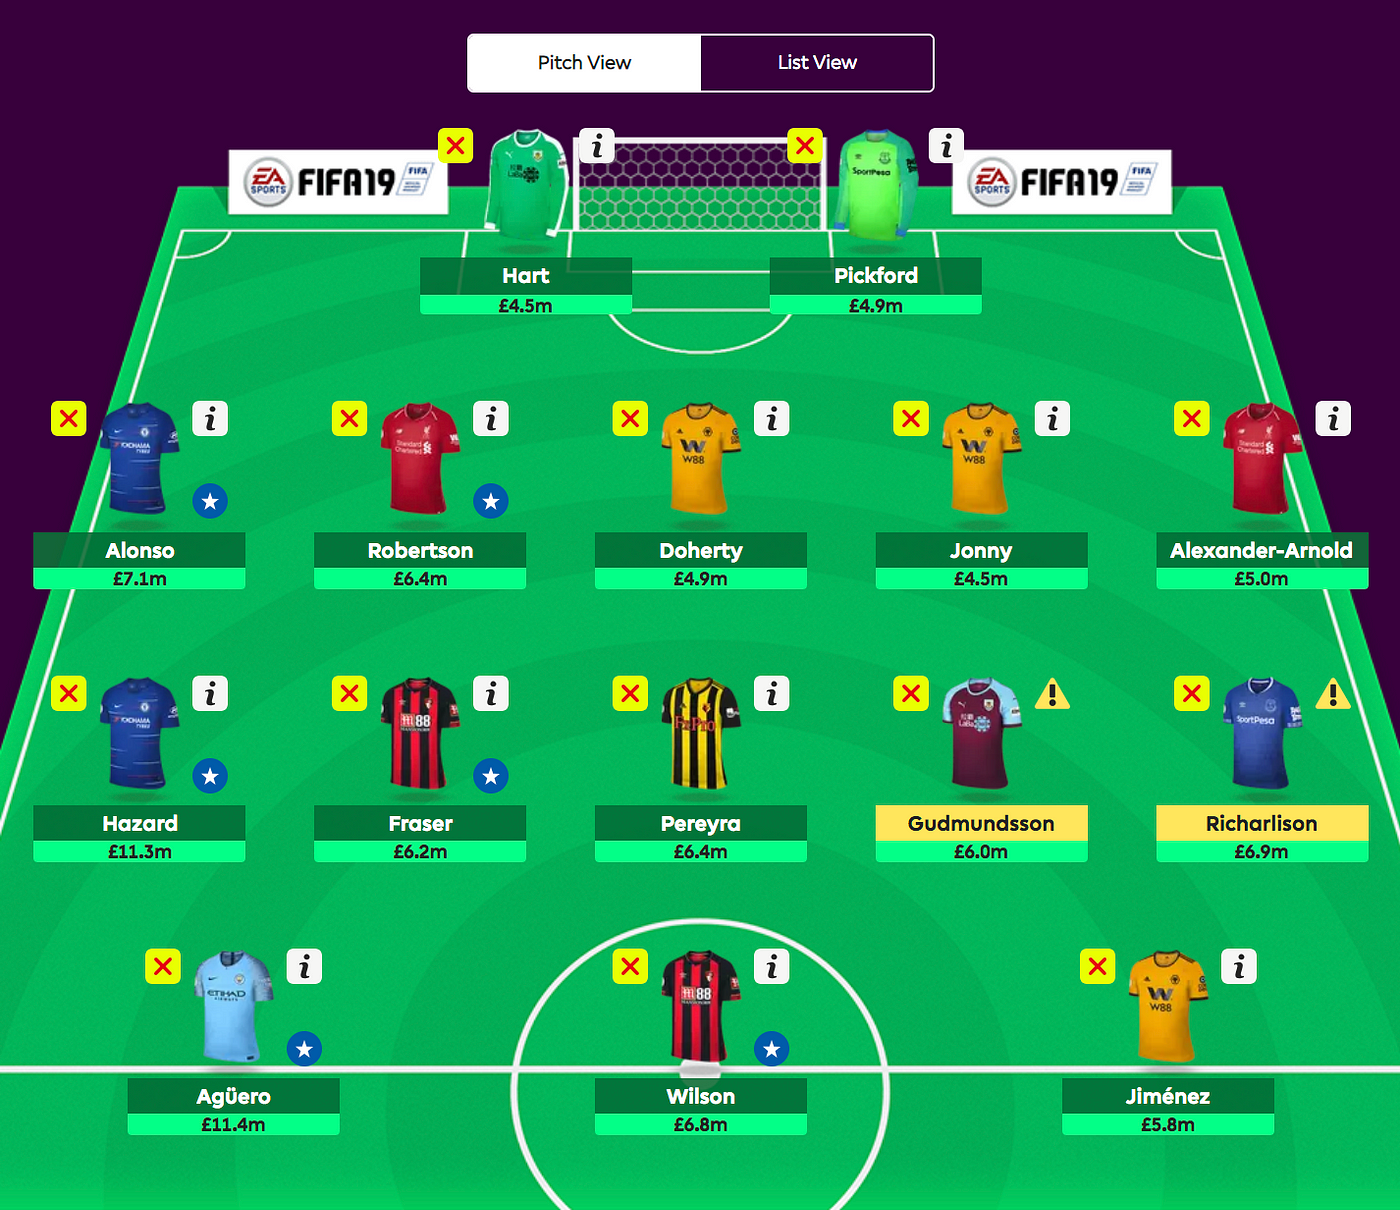 How Our Ai Got Top 10 In The Fantasy Premier League Using Data Science By Dilyan Kovachev Towards Data Science